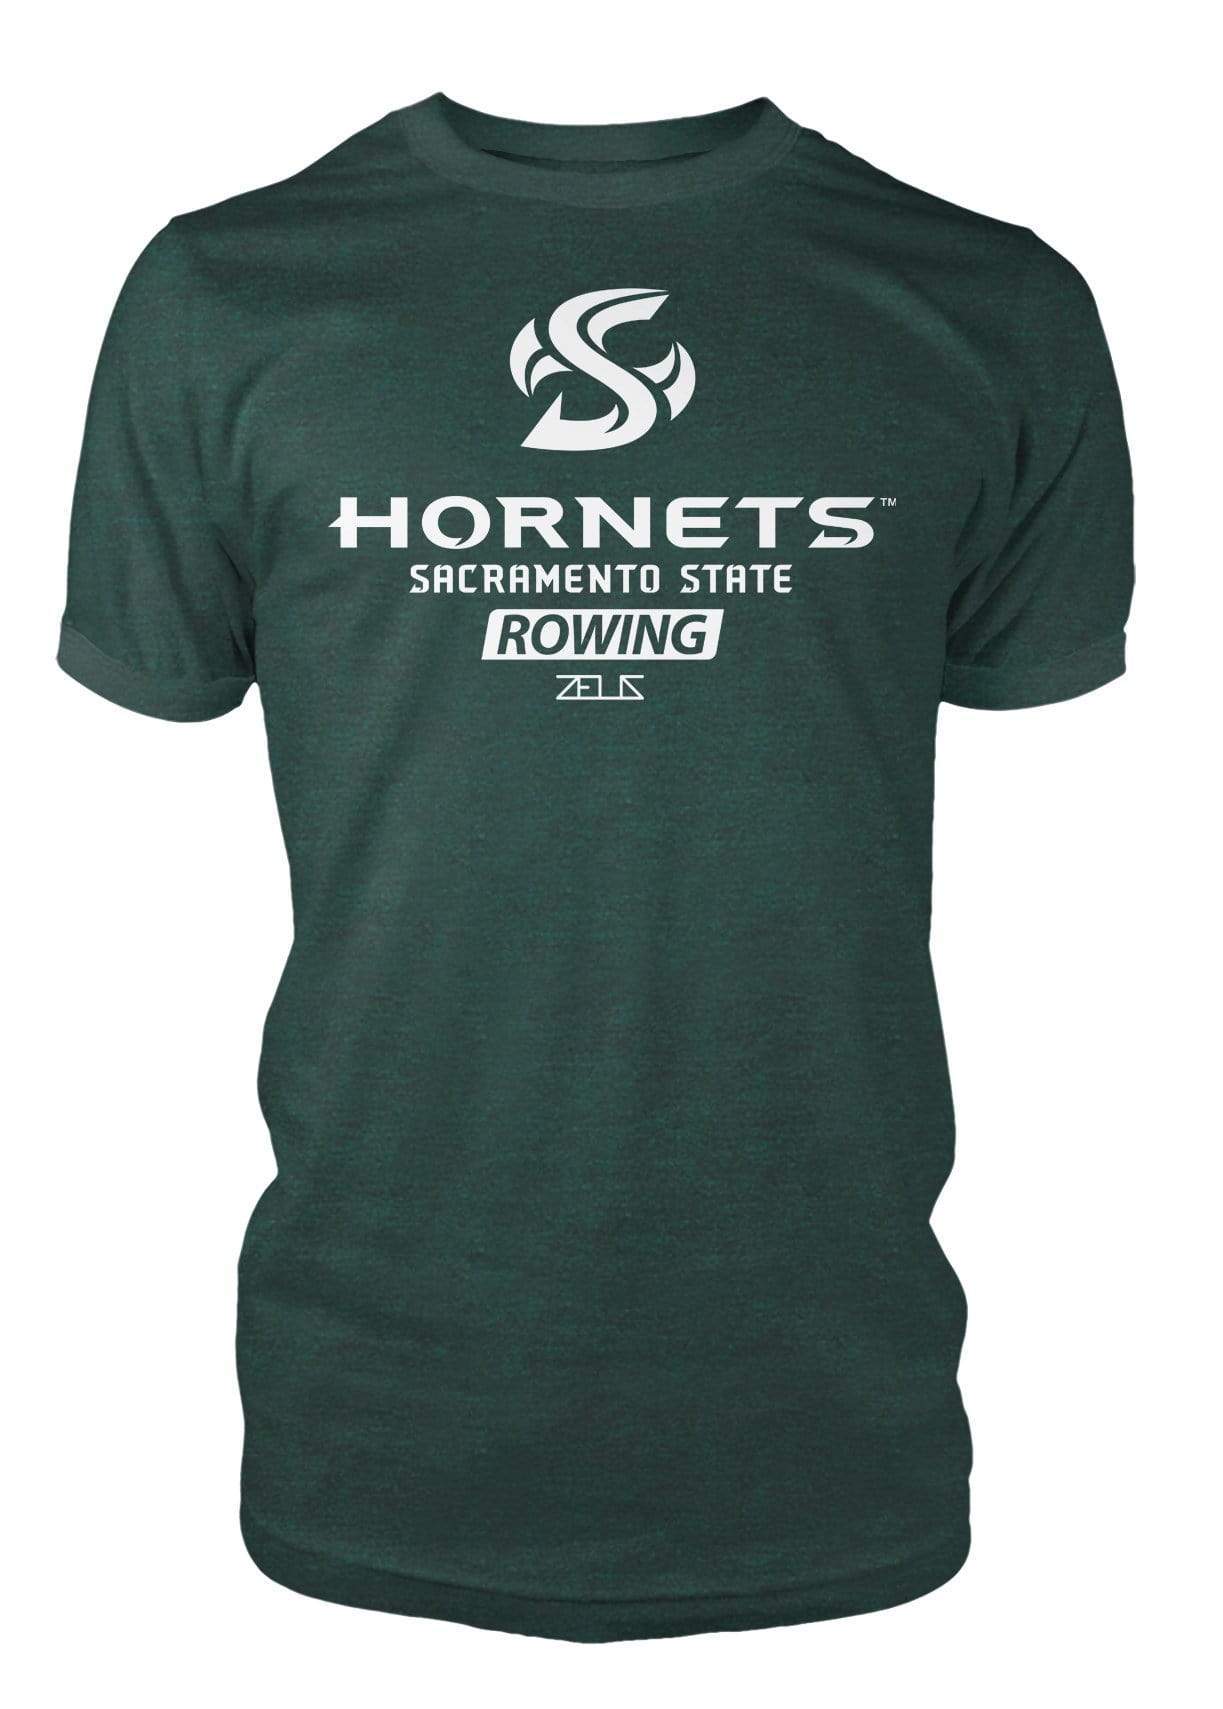 Sacramento State Hornets Sac State Rowing Division I T-shirt by Zeus Collegiate